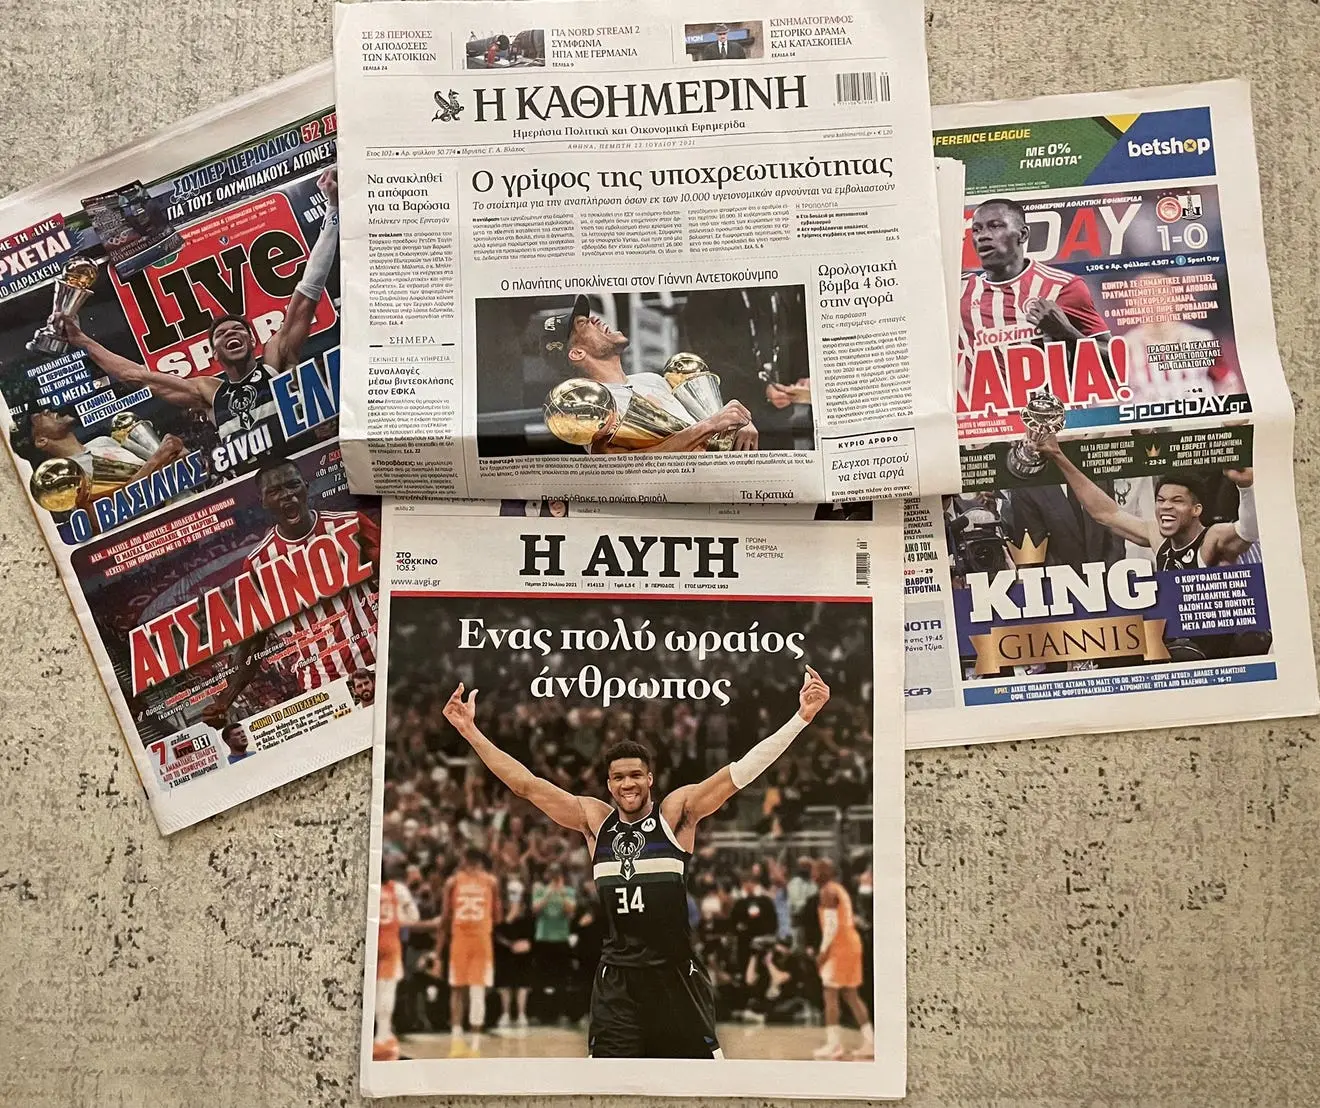 Newspaper front pages in Athens, Greece showing the NBA Championship win of the Milwaukee Bucks